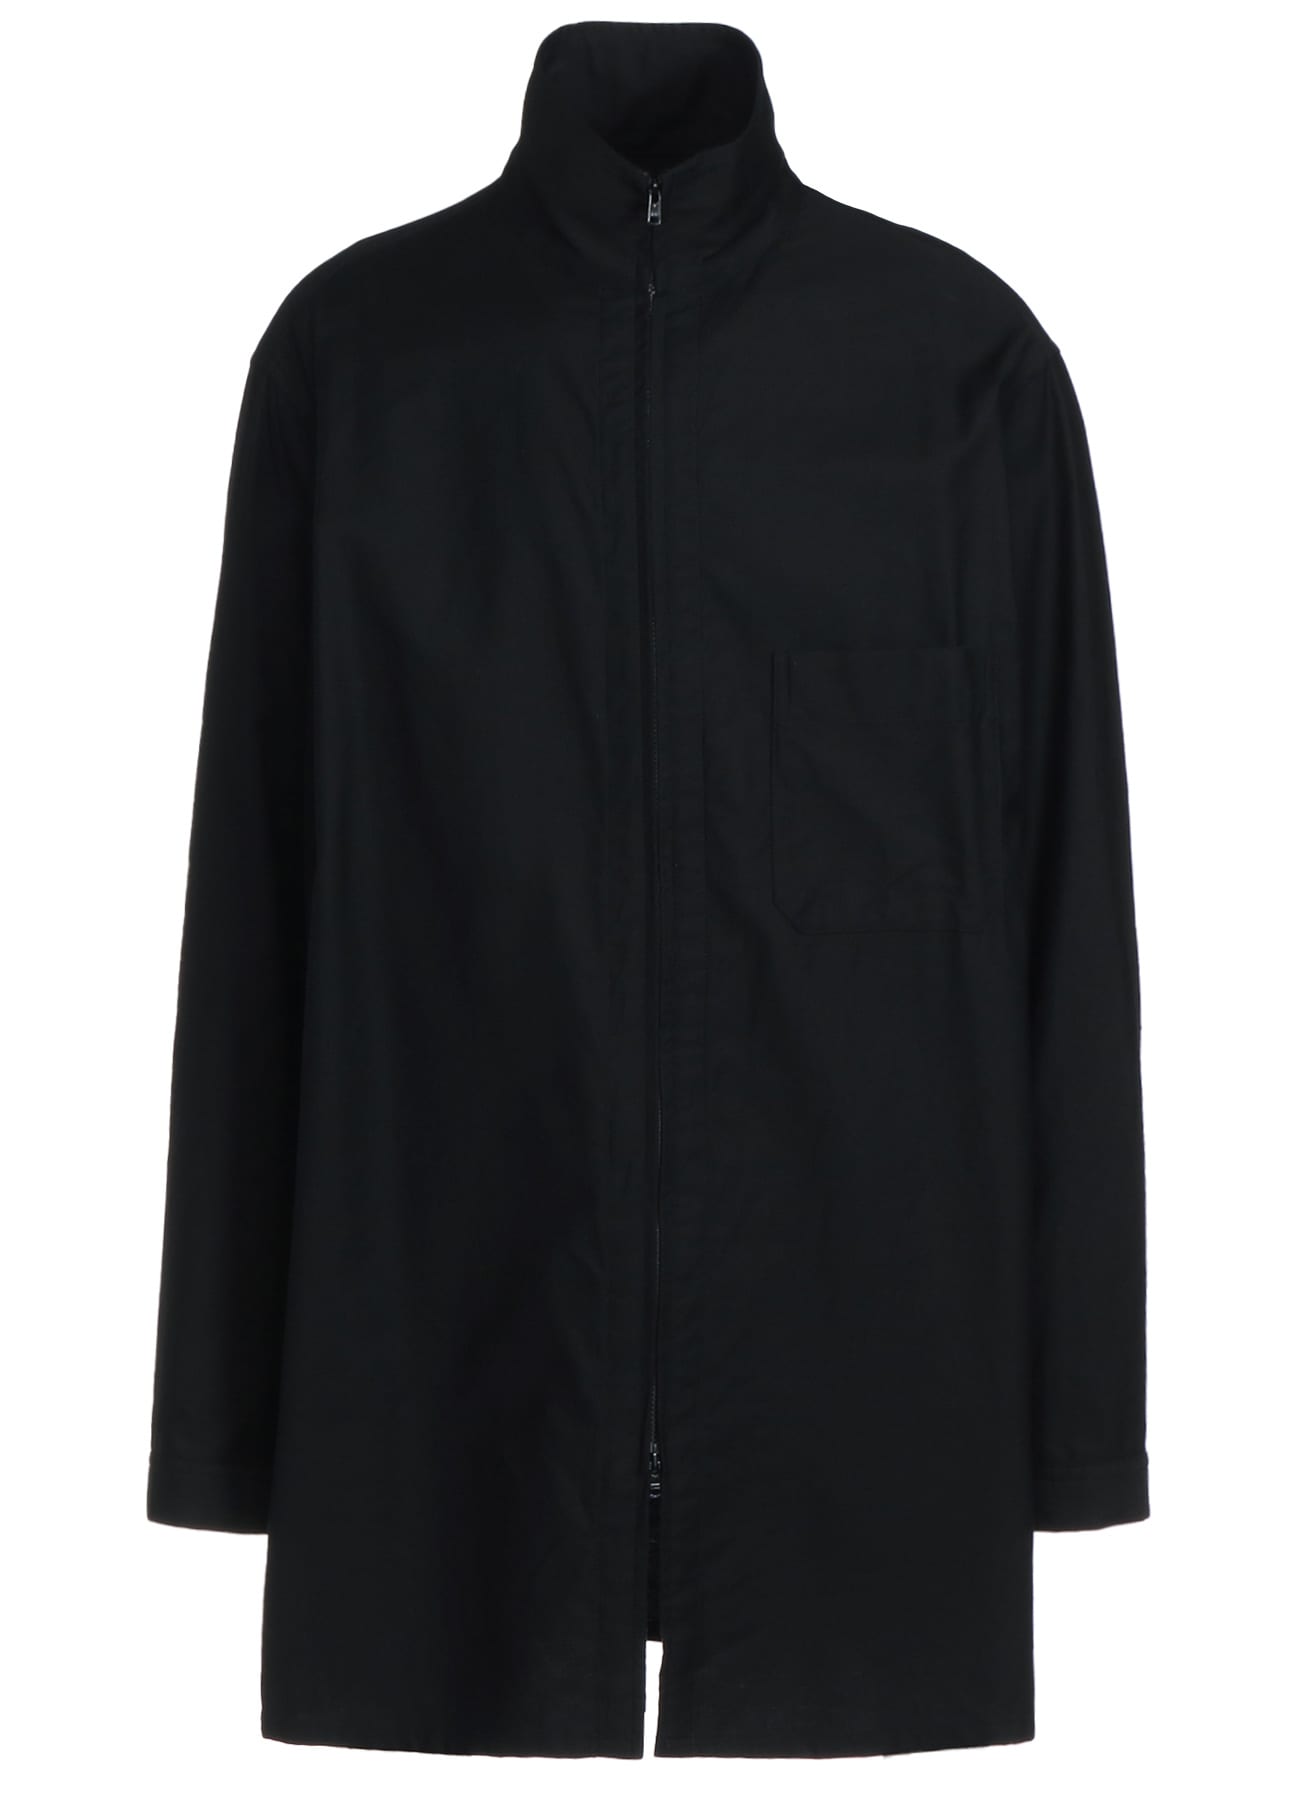 COTTON TWILL STAND COLLAR SHIRTS WITH ZIP DESIGN(M Black): S'YTE 